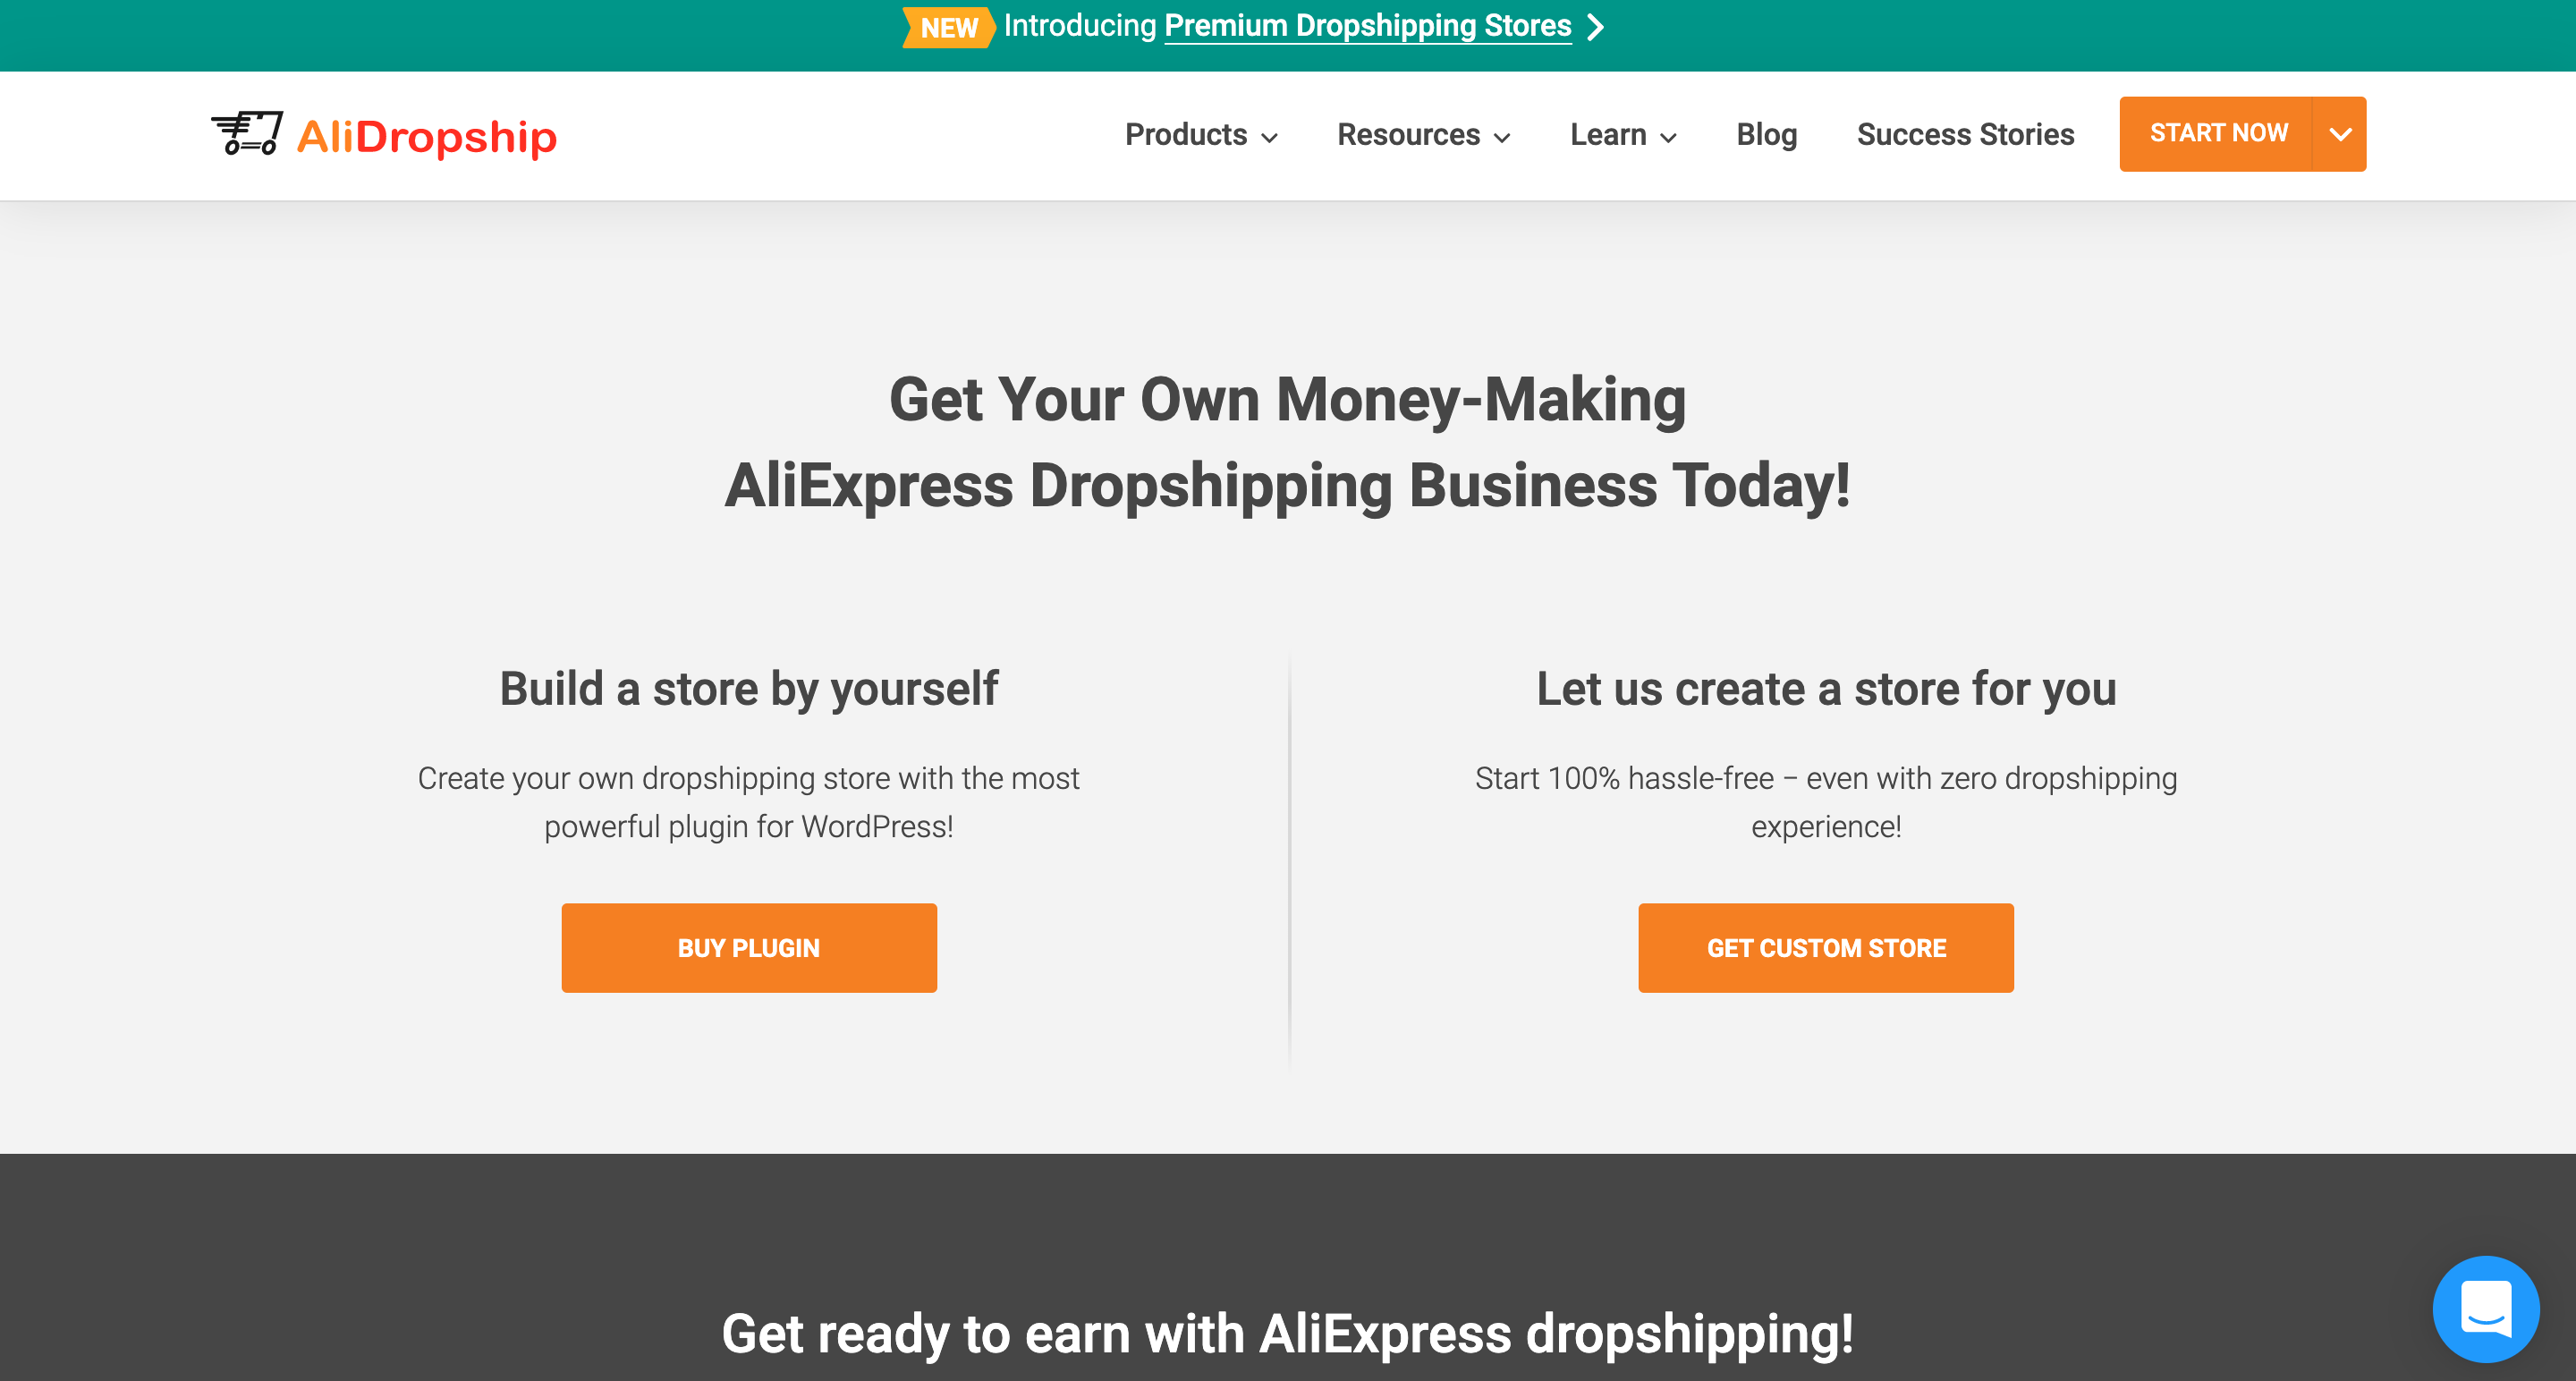 Alidropship dropshipping suppliers in the USA